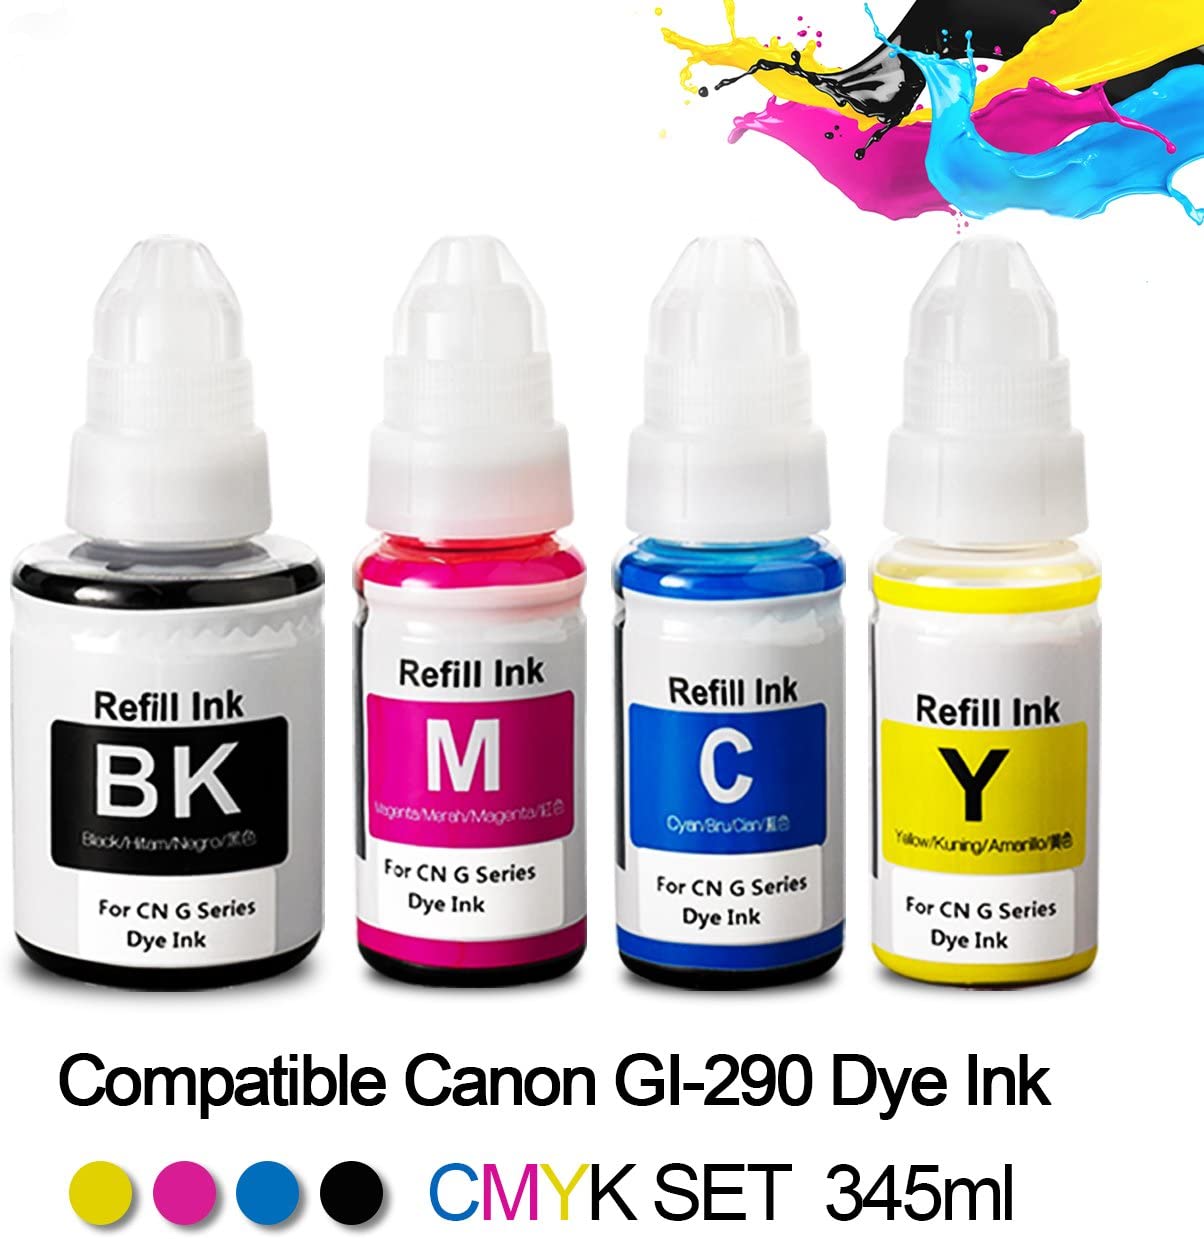 Printers Jack Compatible Canon GI-290 Refill Ink Bottle Kit for Canon PIXMA G4200, PIXMA G3200, PIXMA G4210, PIXMA G2200, PIXMA G1200 Printers - printers-jack